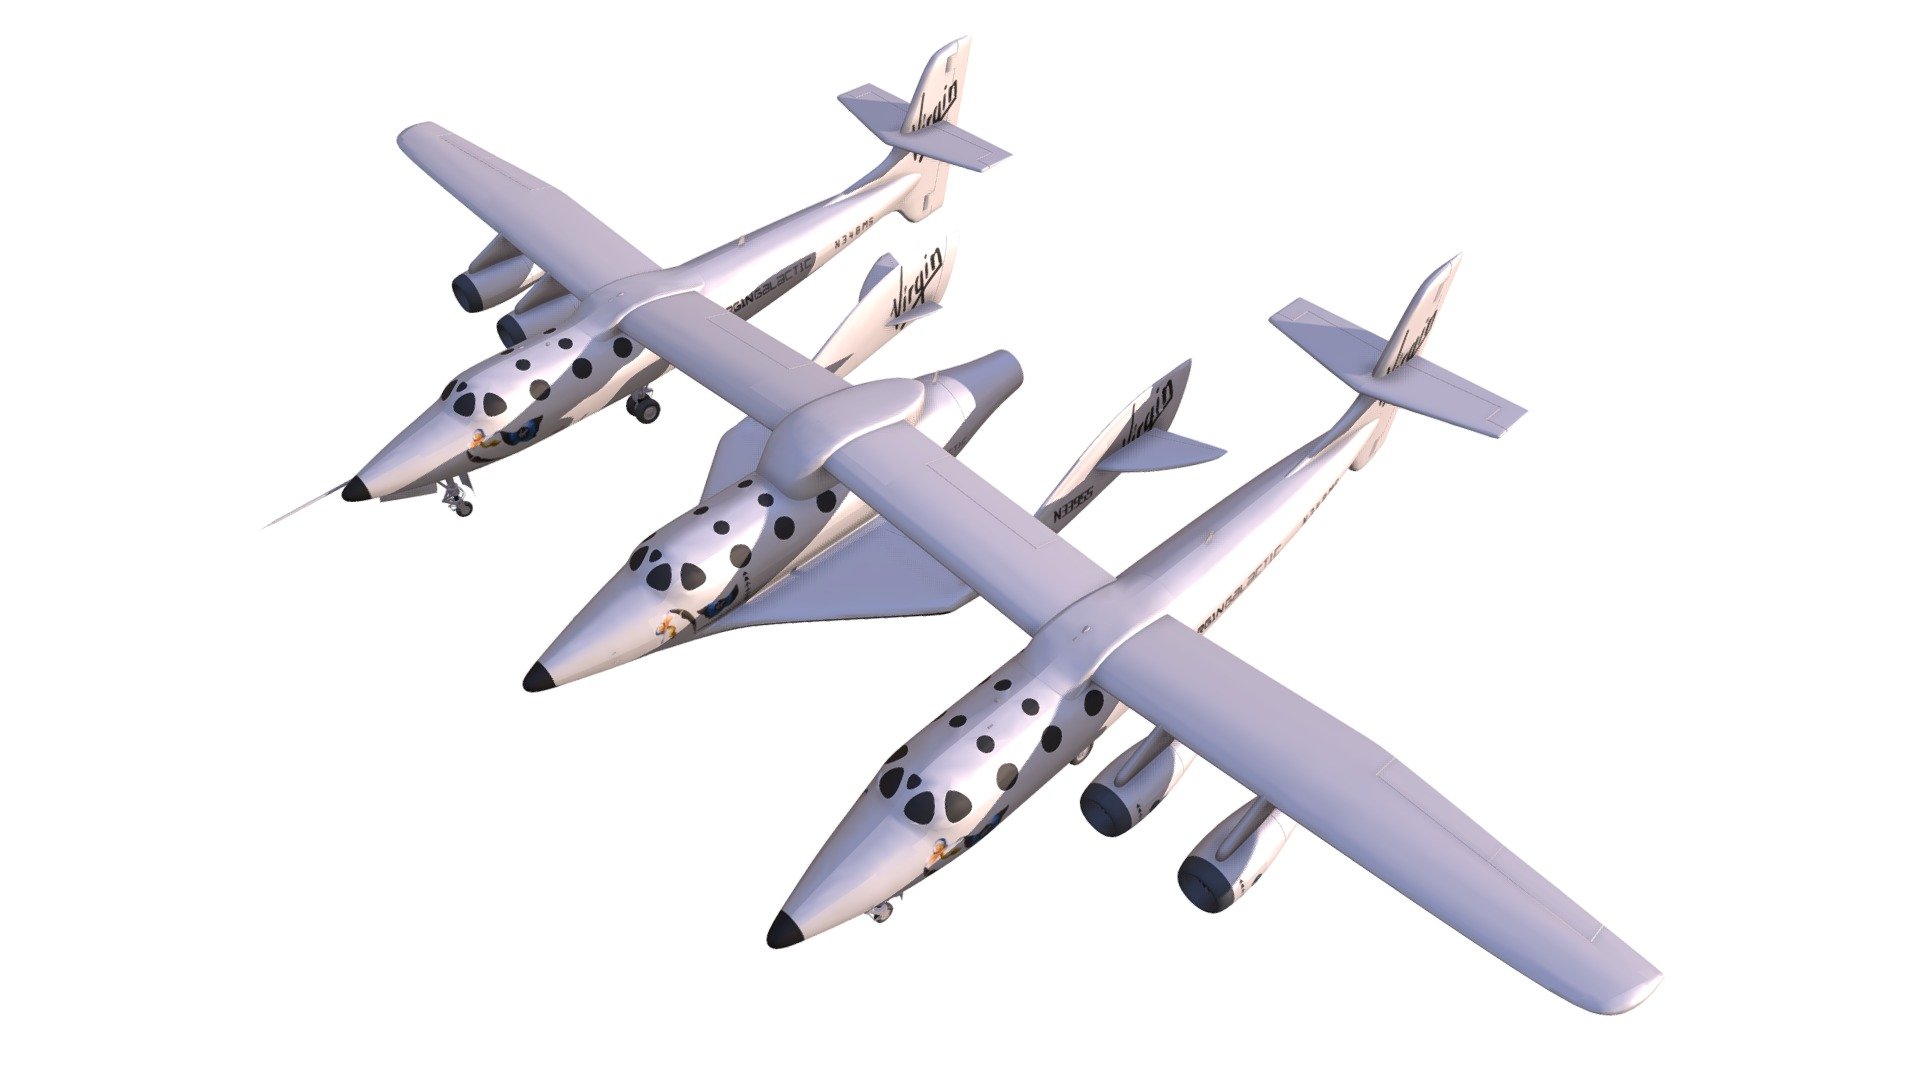 High quality 3d model of Scaled Composites White Knight Two aircraft 3d model